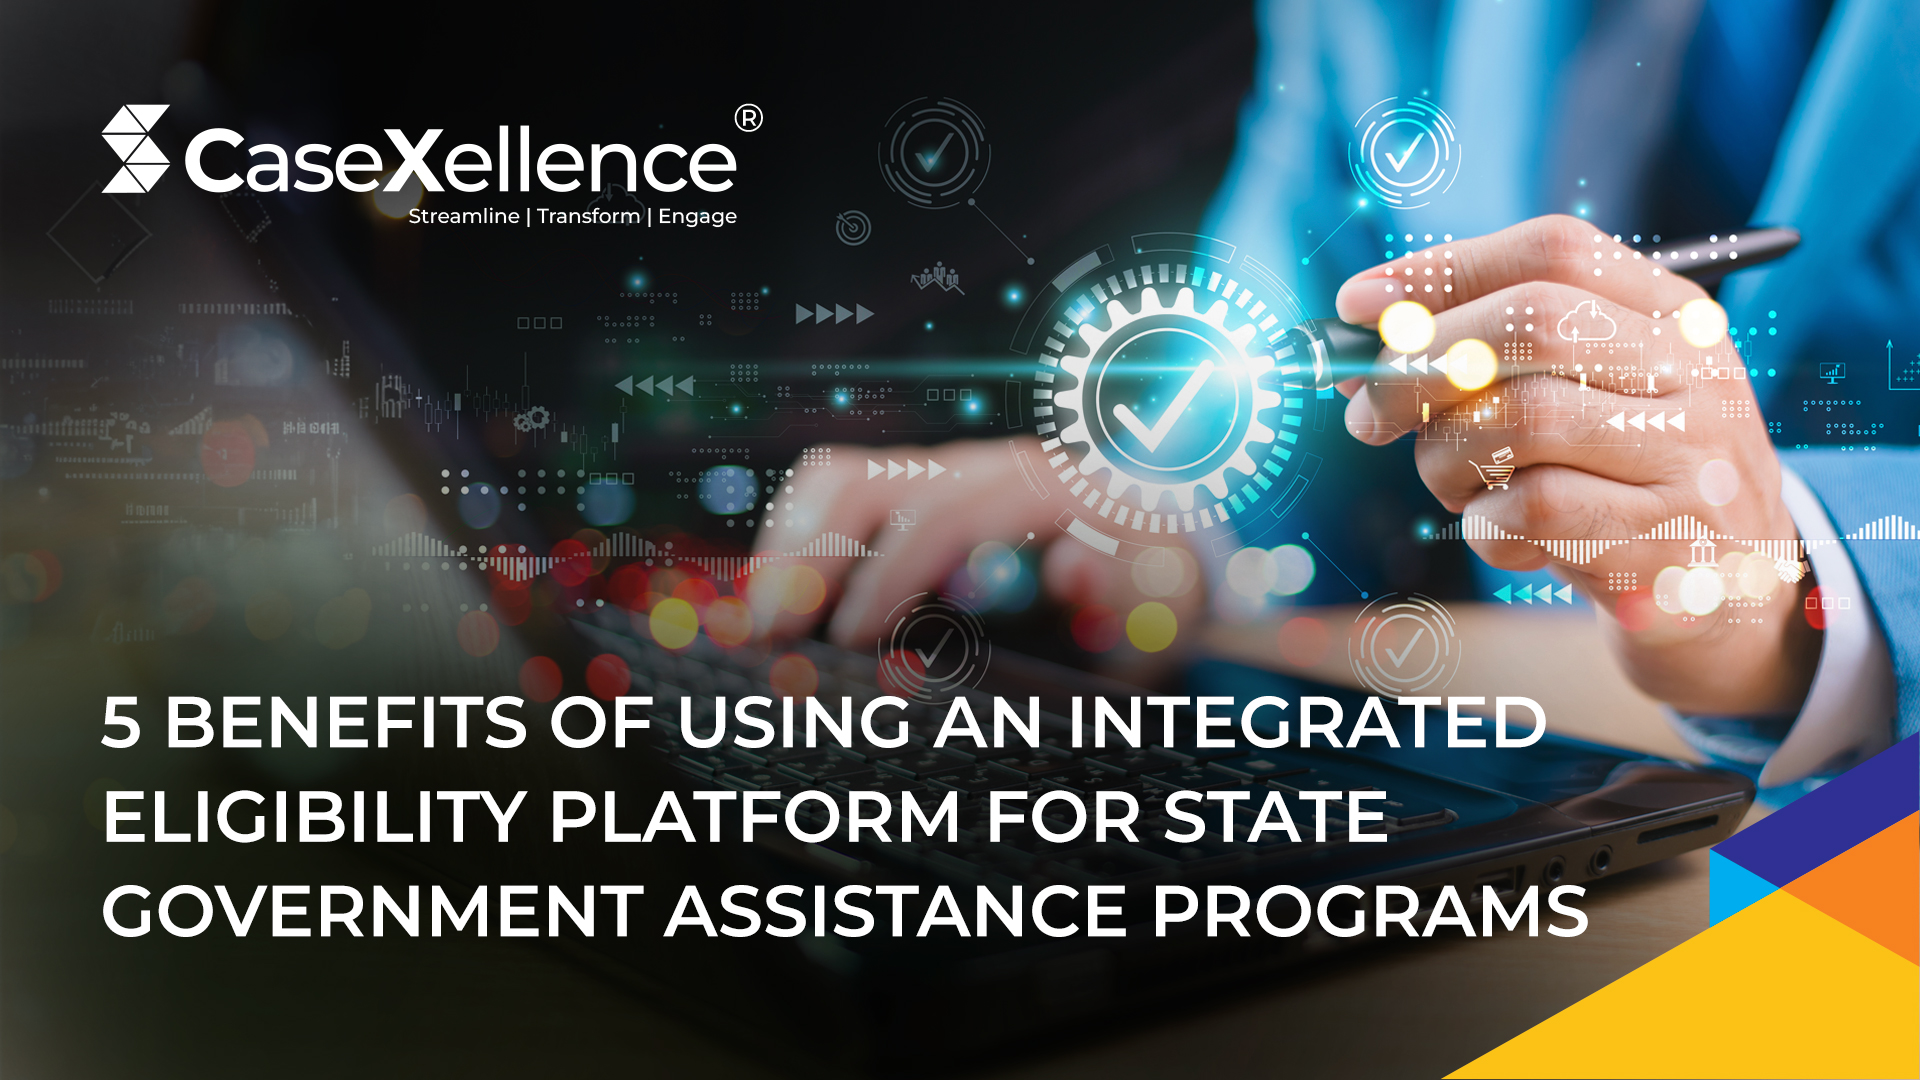 5 Benefits of Using an Integrated Eligibility Platform for State Government Assistance Programs